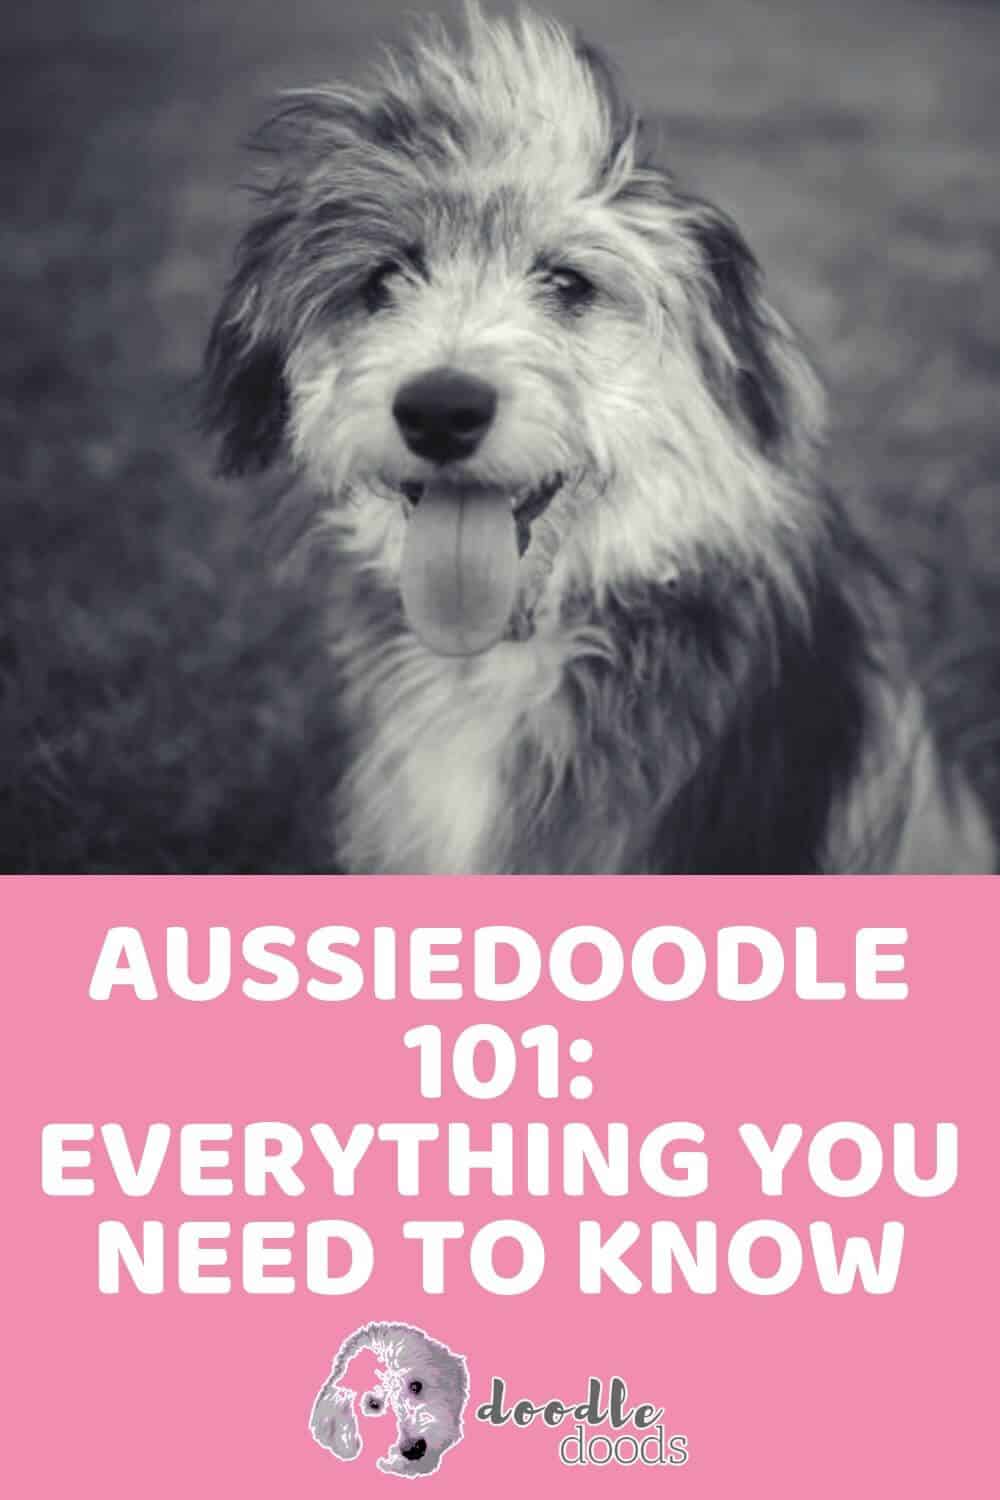 facts about aussiedoodles